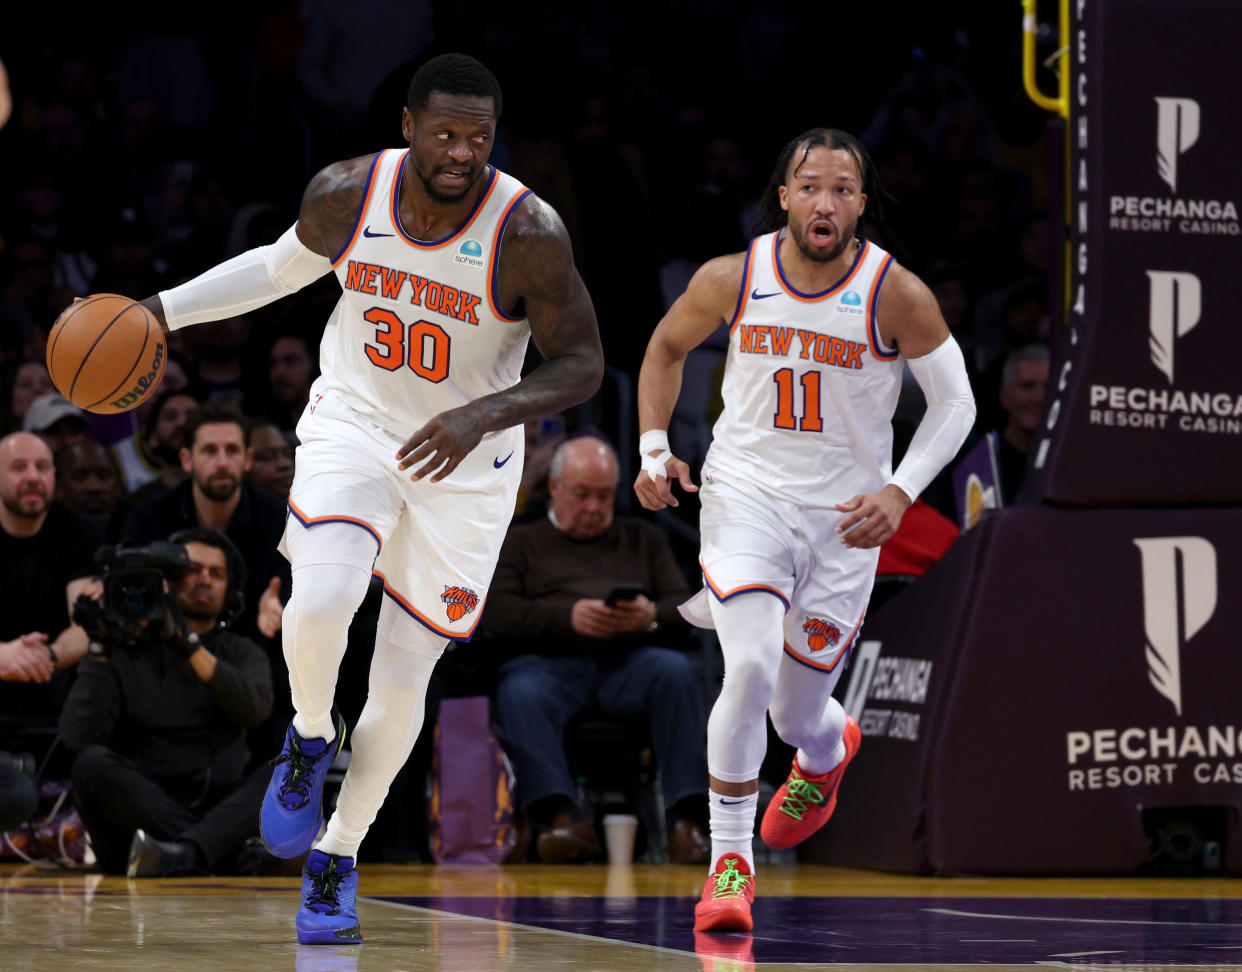 LOS ANGELES, CALIFORNIA - DECEMBER 18: Julius Randle #30 of the New York Knicks brings the ball up court with Jalen Brunson #11 during a 114-109 win over the Los Angeles Lakers at Crypto.com Arena on December 18, 2023 in Los Angeles, California. NOTE TO USER: User expressly acknowledges and agrees that, by downloading and or using this photograph, User is consenting to the terms and conditions of the Getty Images License Agreement. (Photo by Harry How/Getty Images)